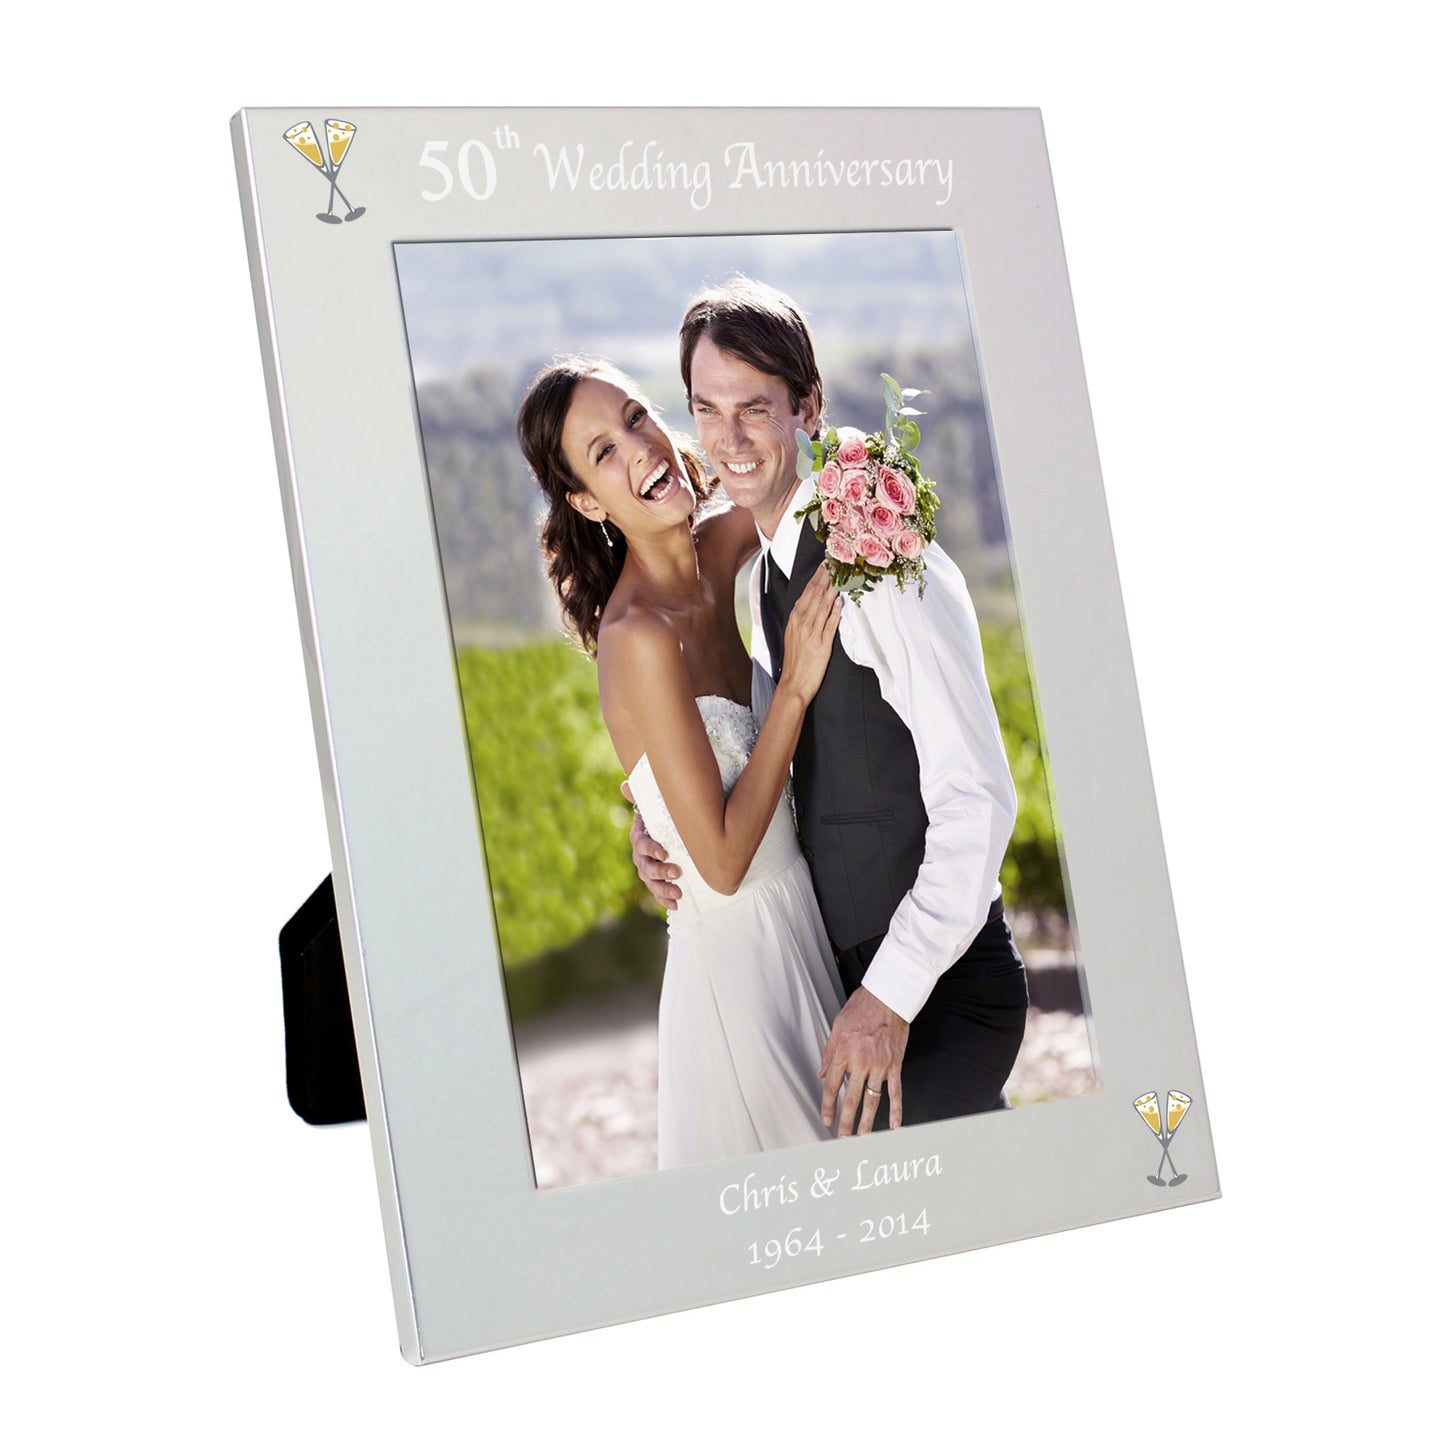 Personalised Silver 5x7 50th Wedding Anniversary Photo Frame - Personalise It!